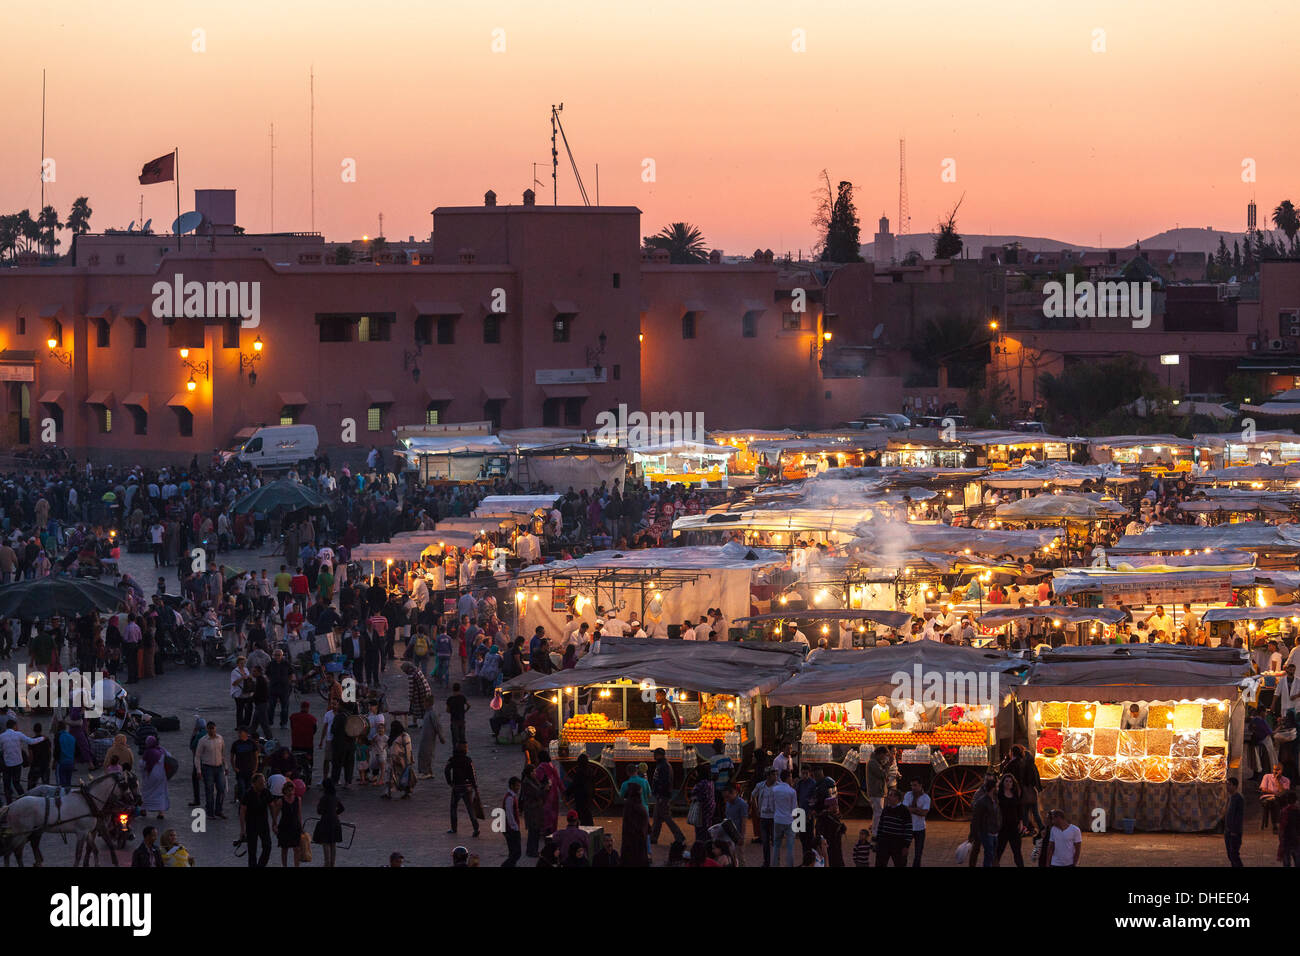 Food stalls in the Jemaa El Fna at sunset, Marrakesh, Morocco, North Africa, Africa Stock Photo